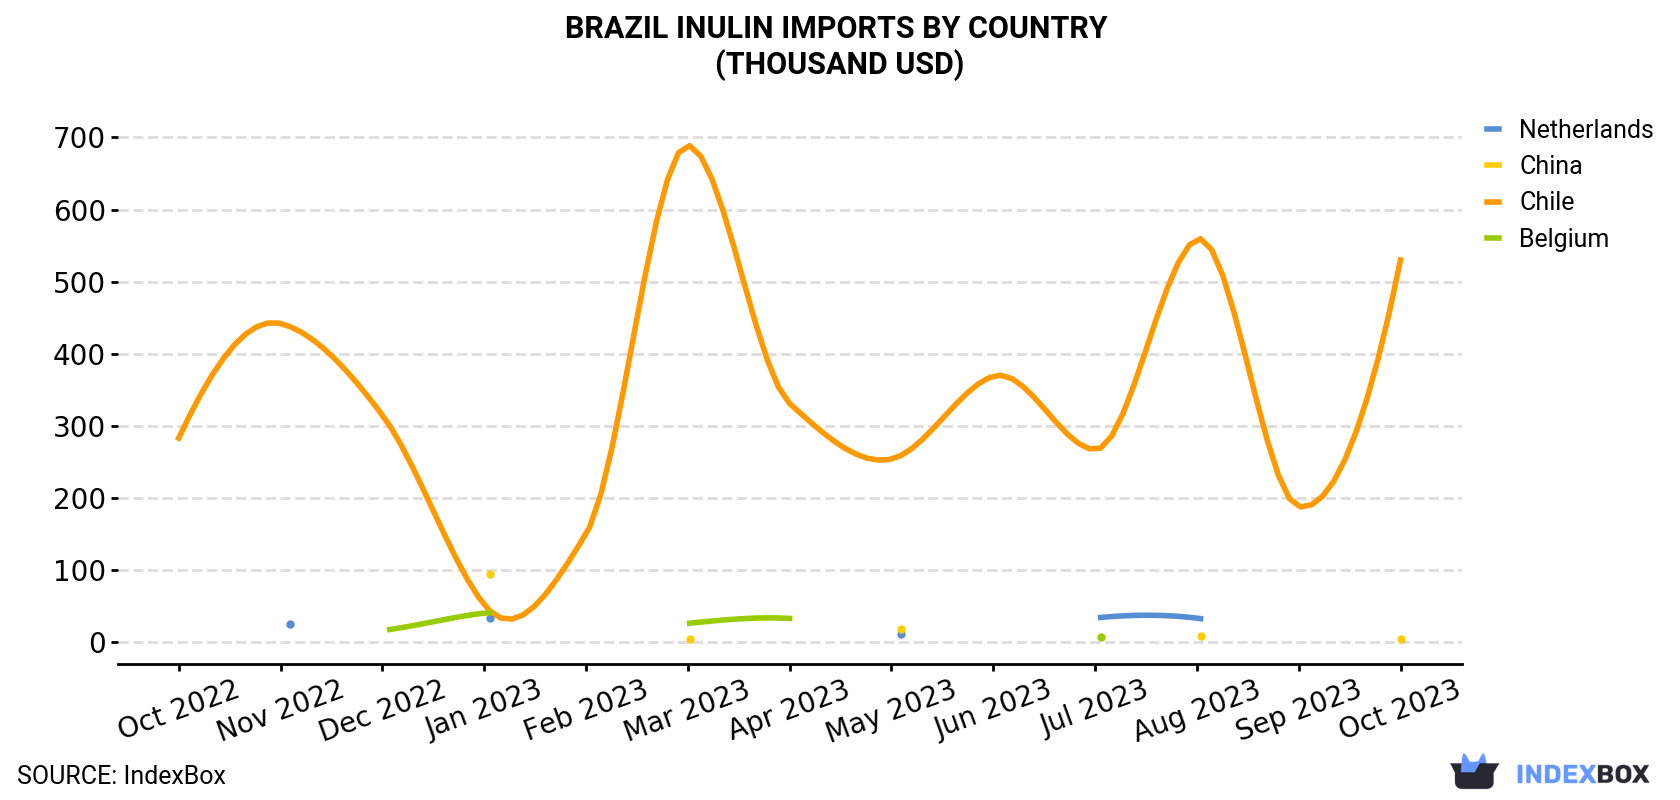 Brazil Inulin Imports By Country (Thousand USD)